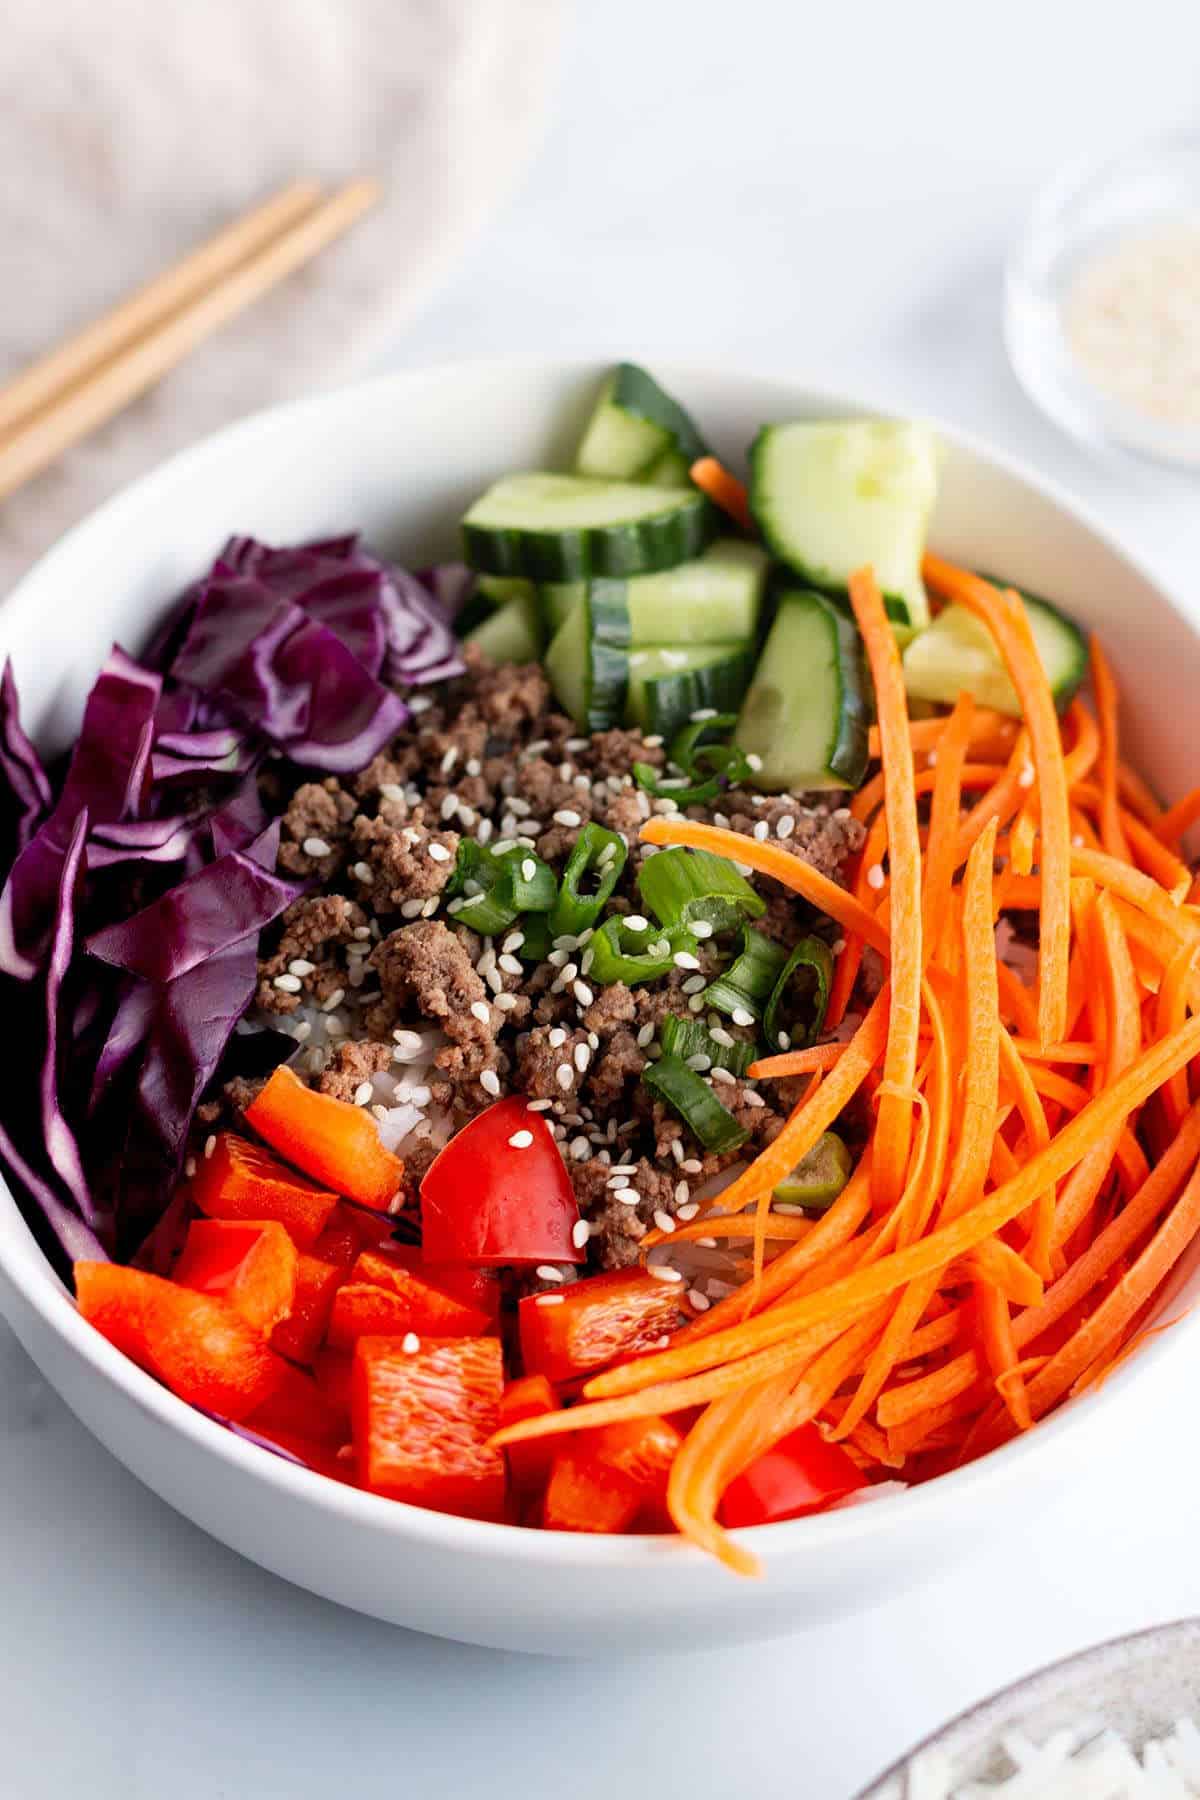 Ground beef, rice, shredded carrots, cucumber, cabbage, and green onions in a bowl.